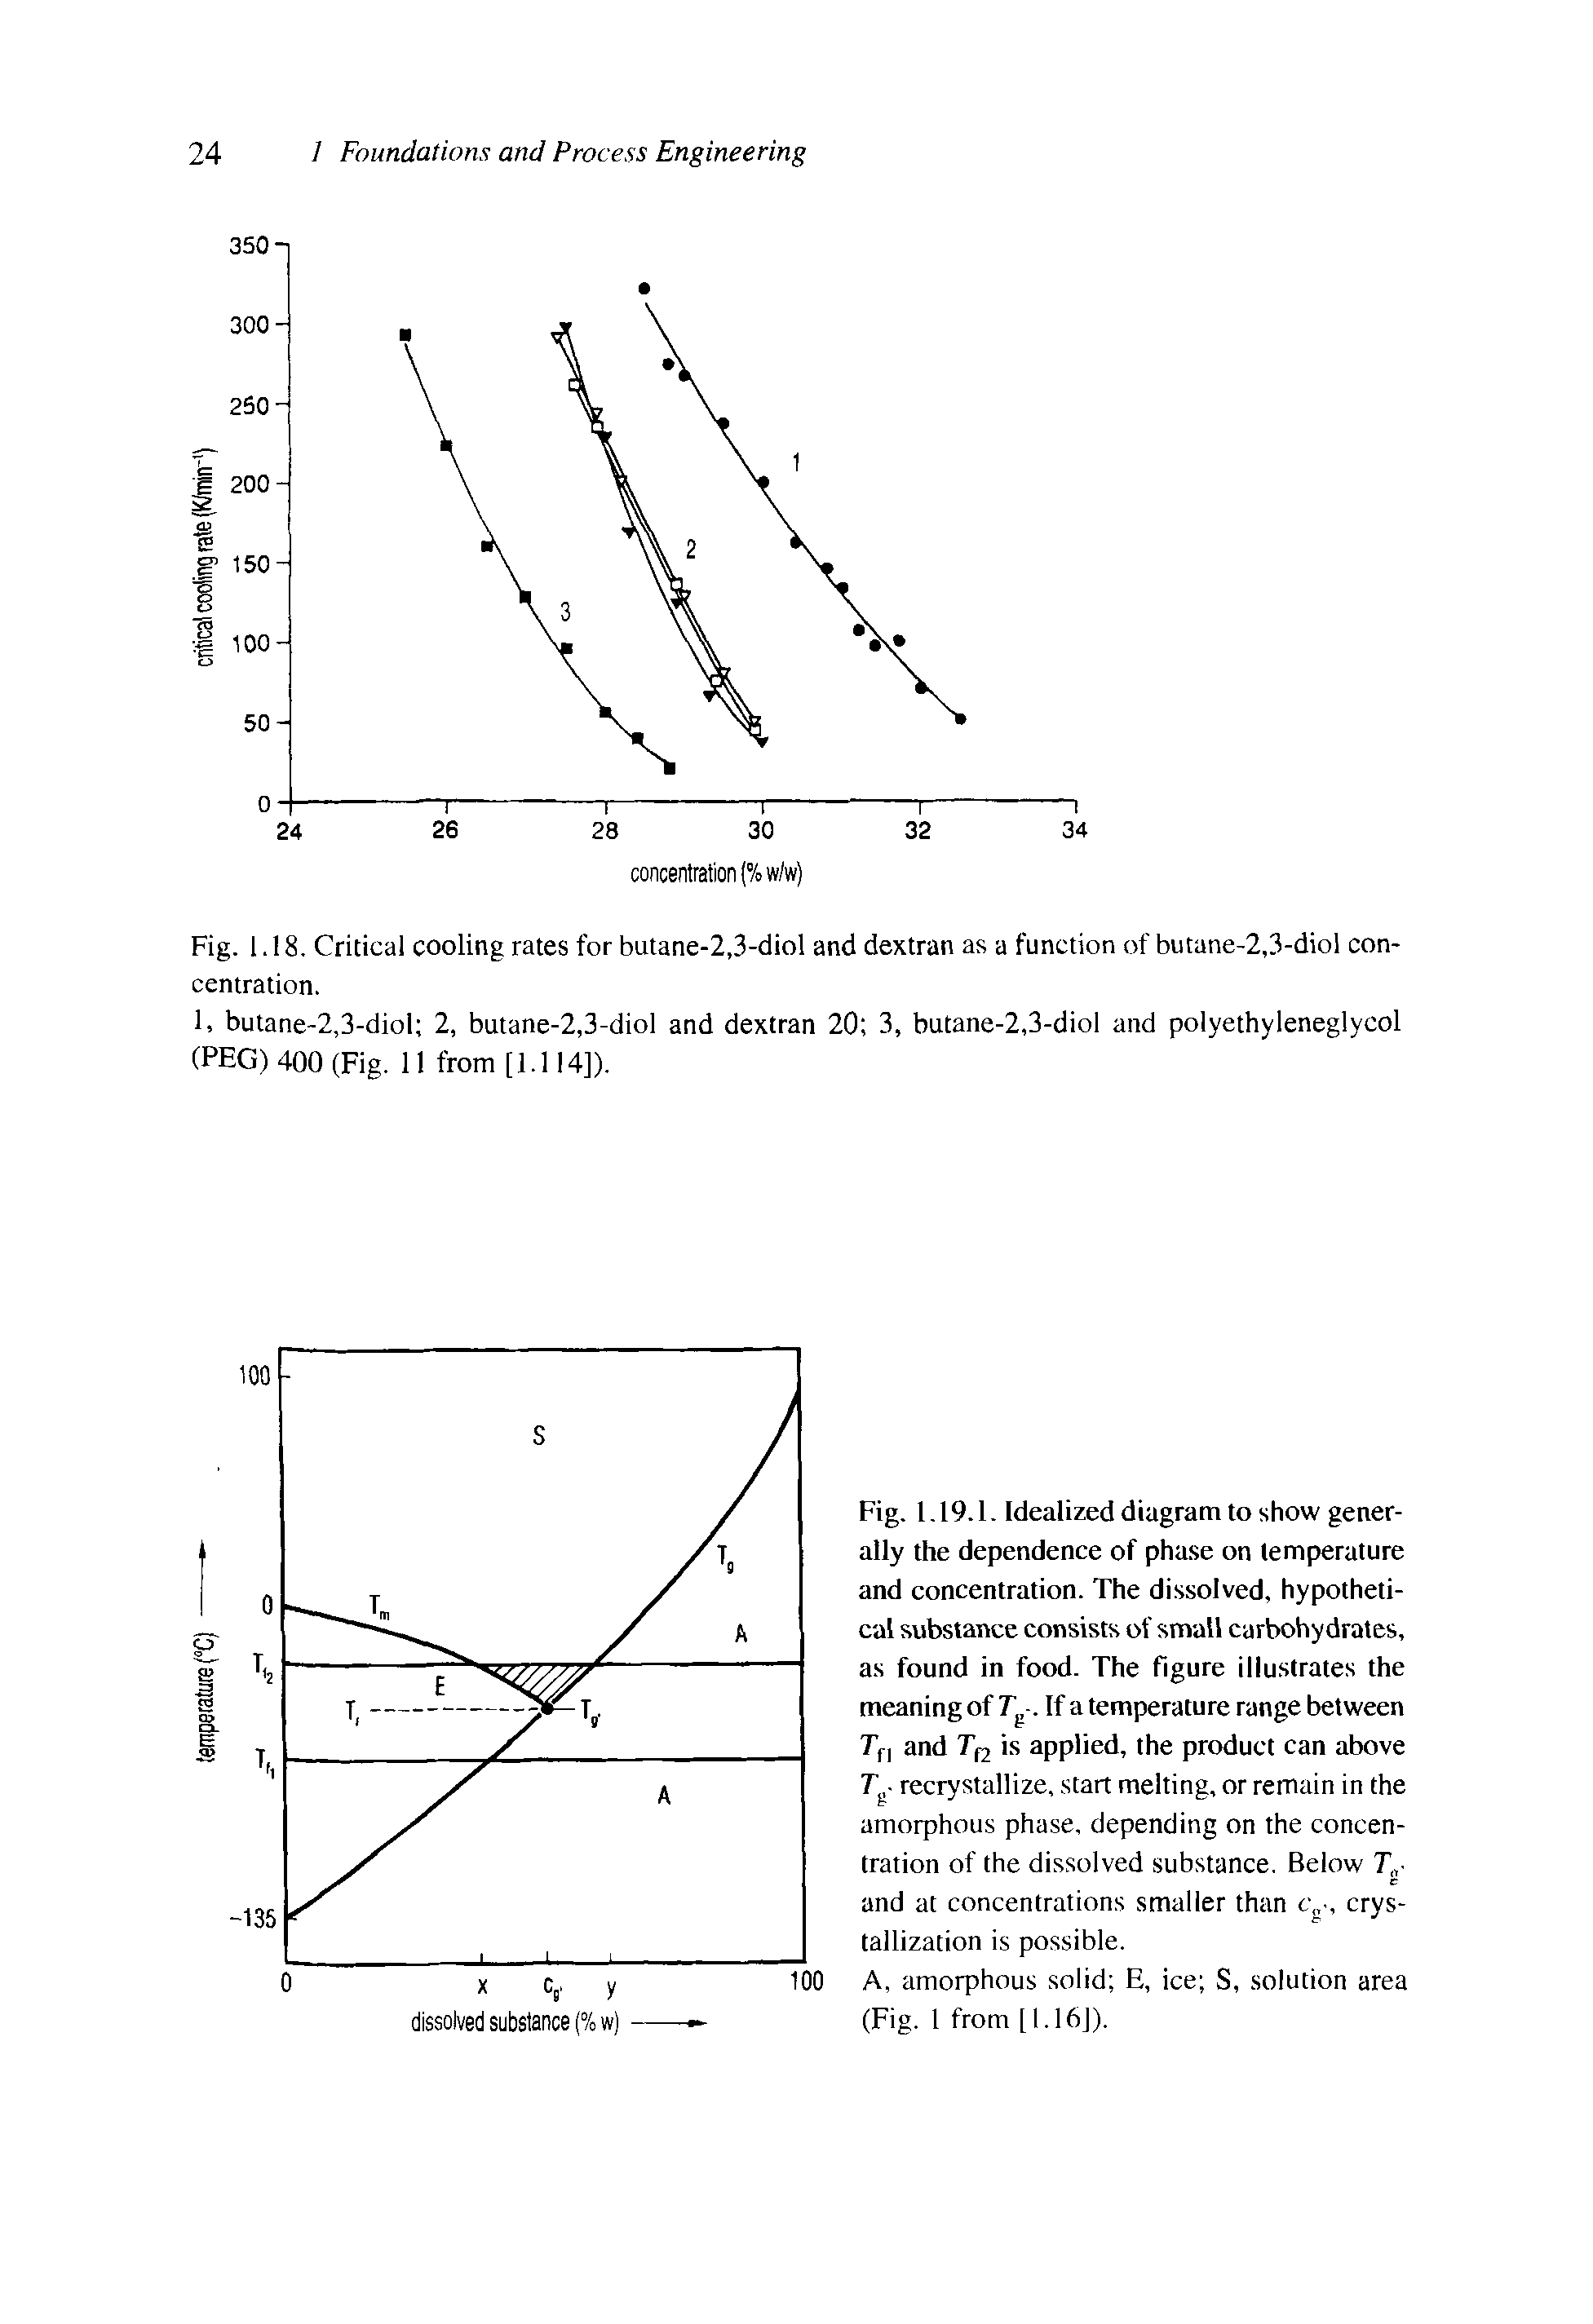 Fig. 1.18. Critical cooling rates for butane-2,3-diol and dextran as a function of butane-2,3-diol concentration.